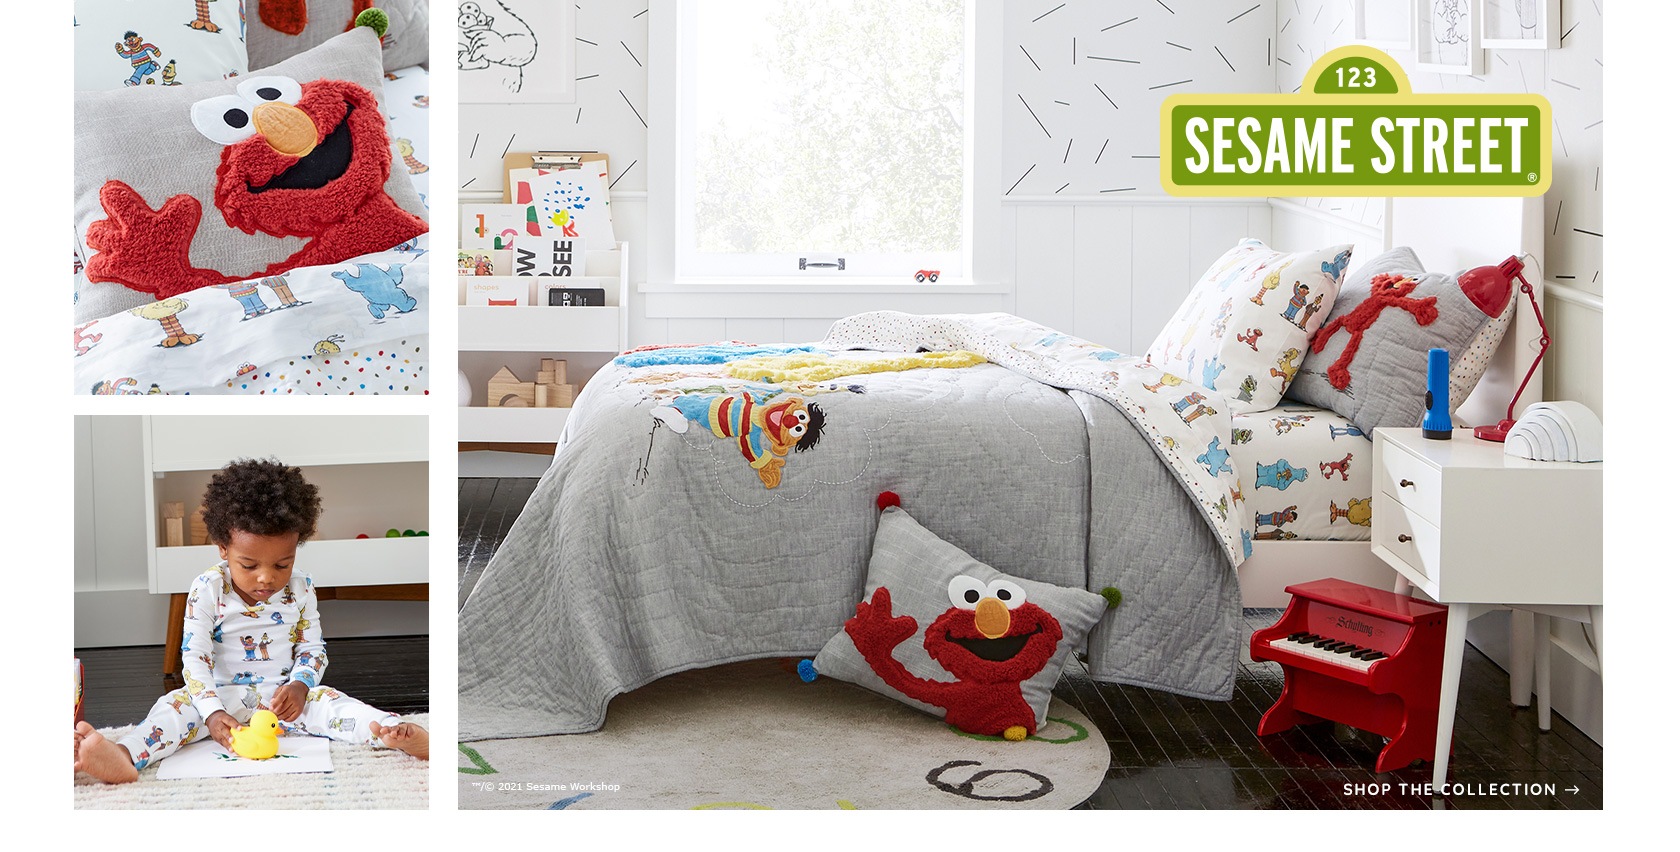 Sesame Street – Shop the collection